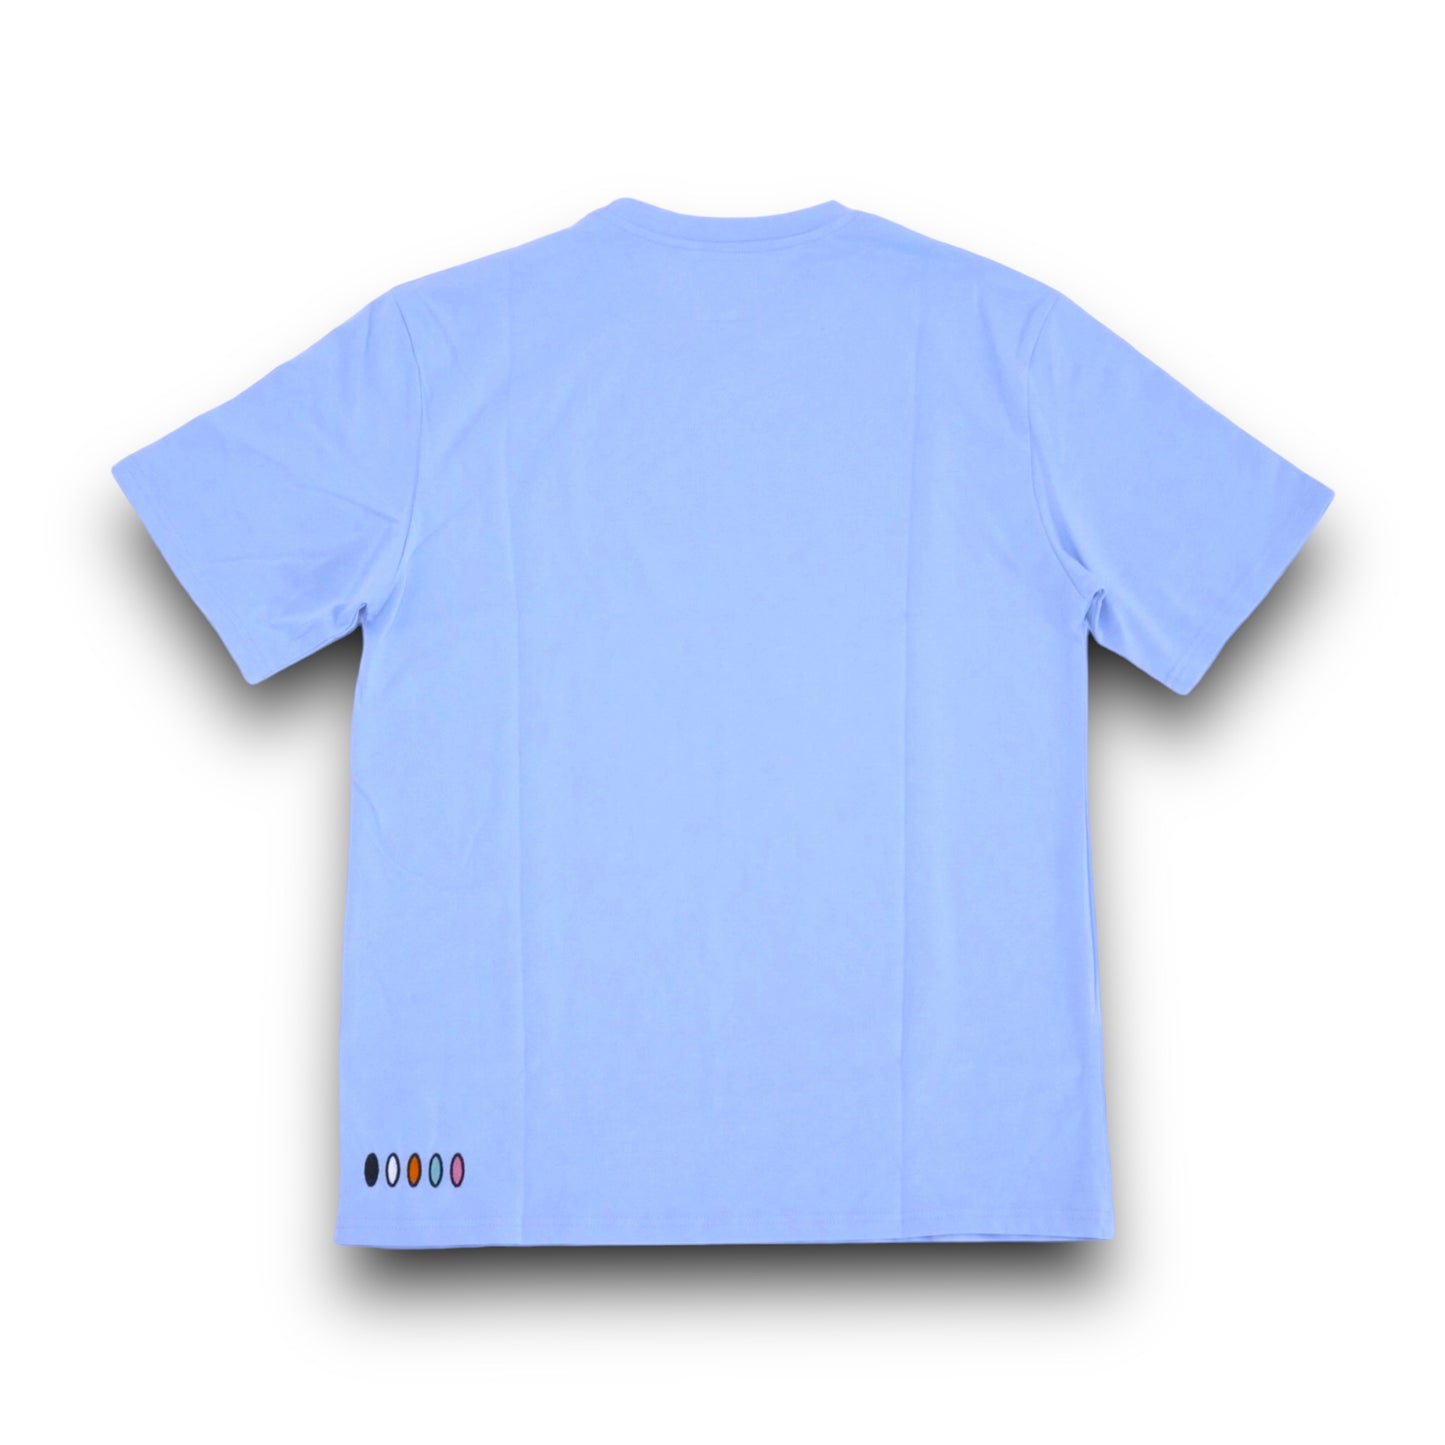 Patch tee blue